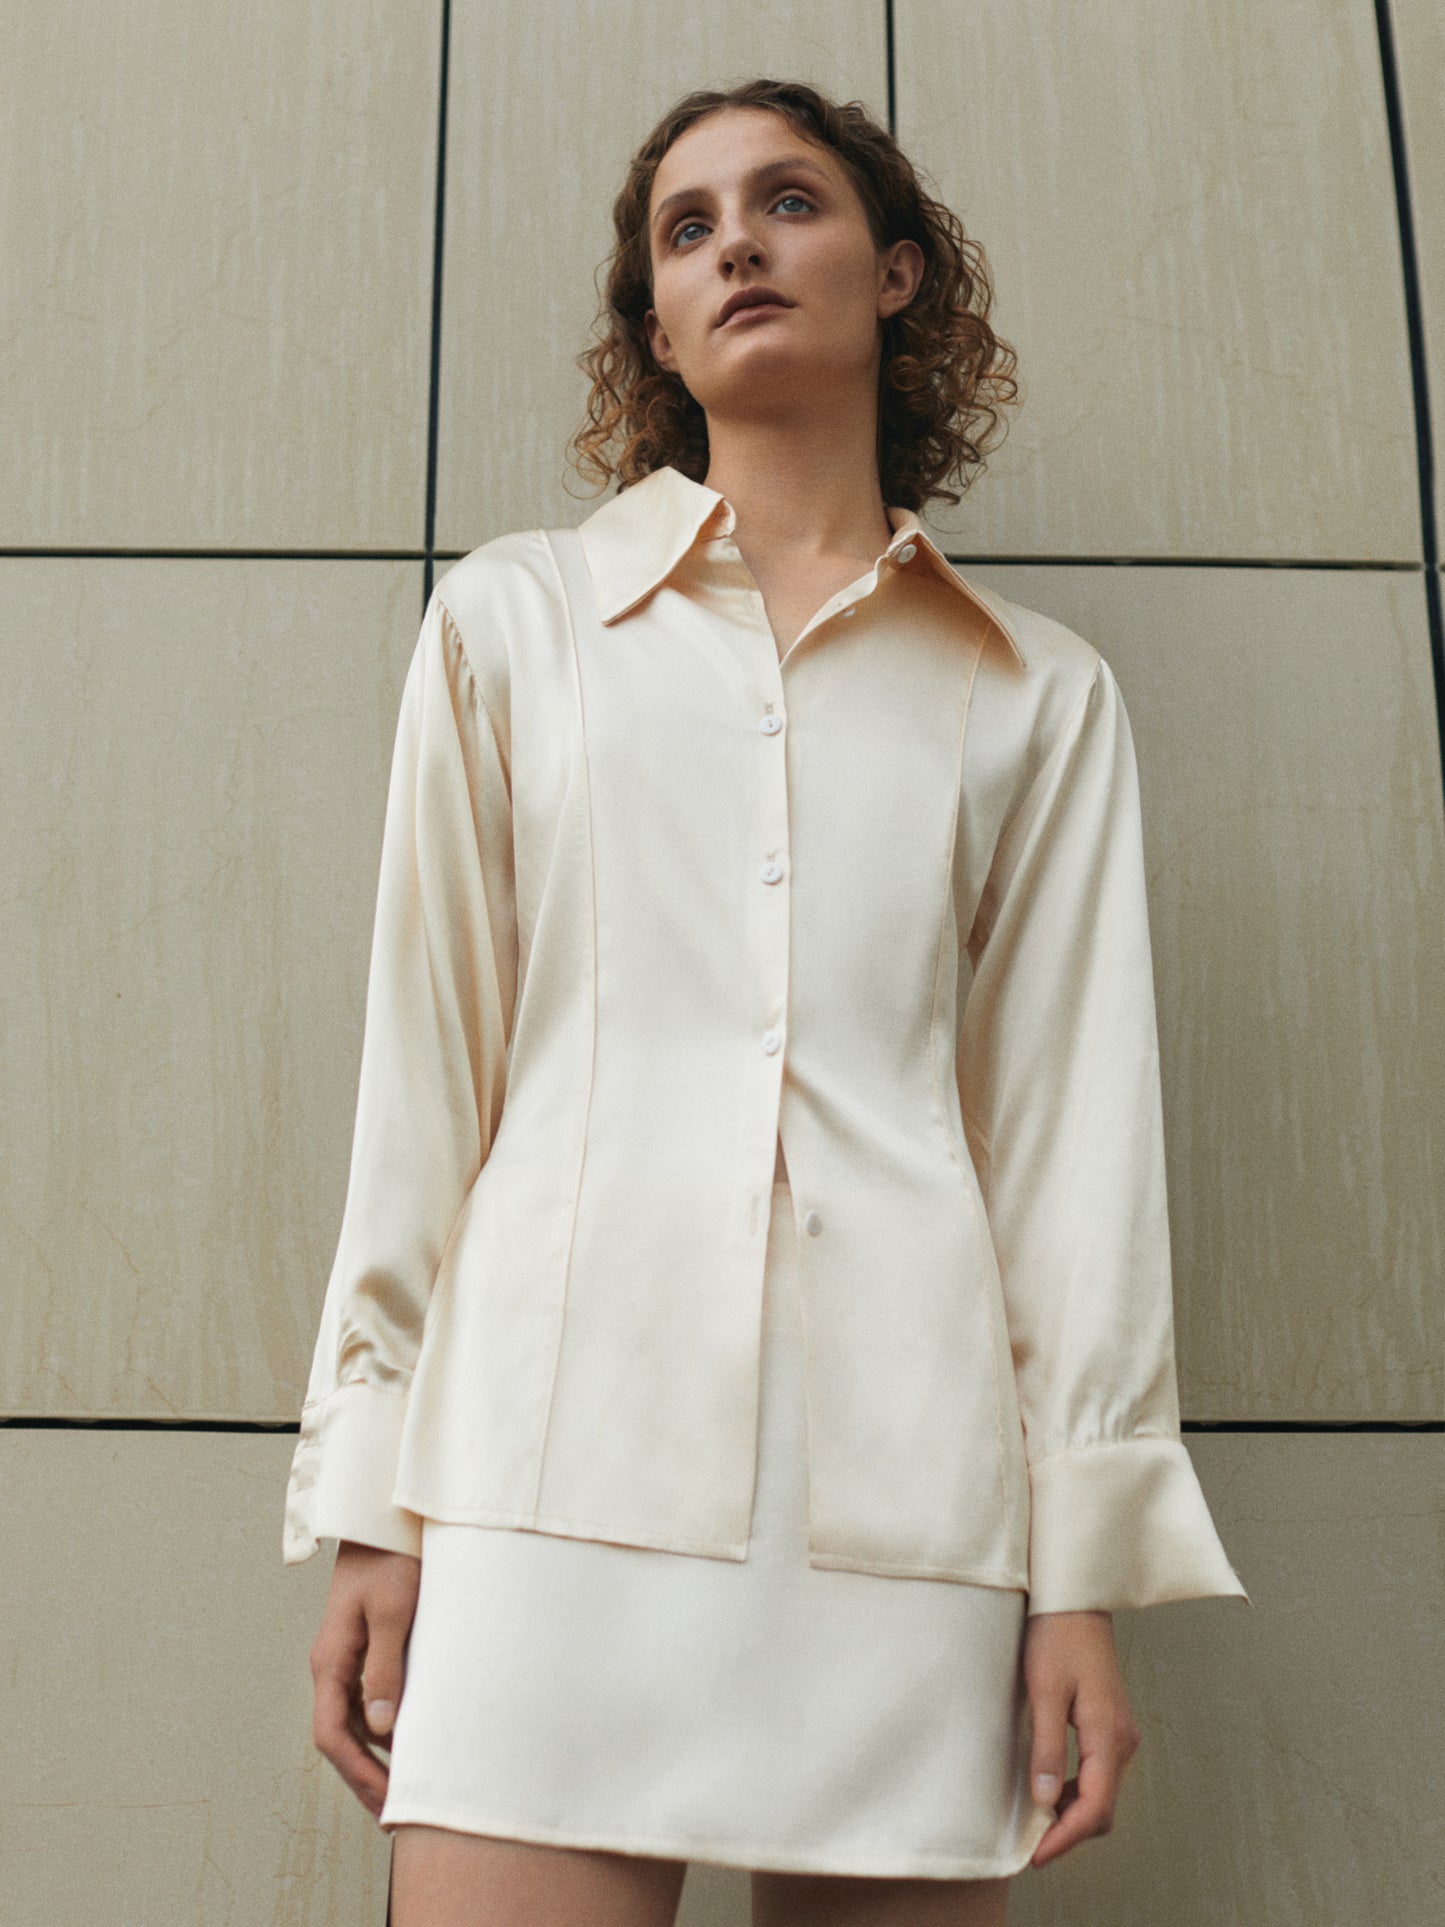 silky suit mini skirt and blouse in creme color from FORMA clothing brand